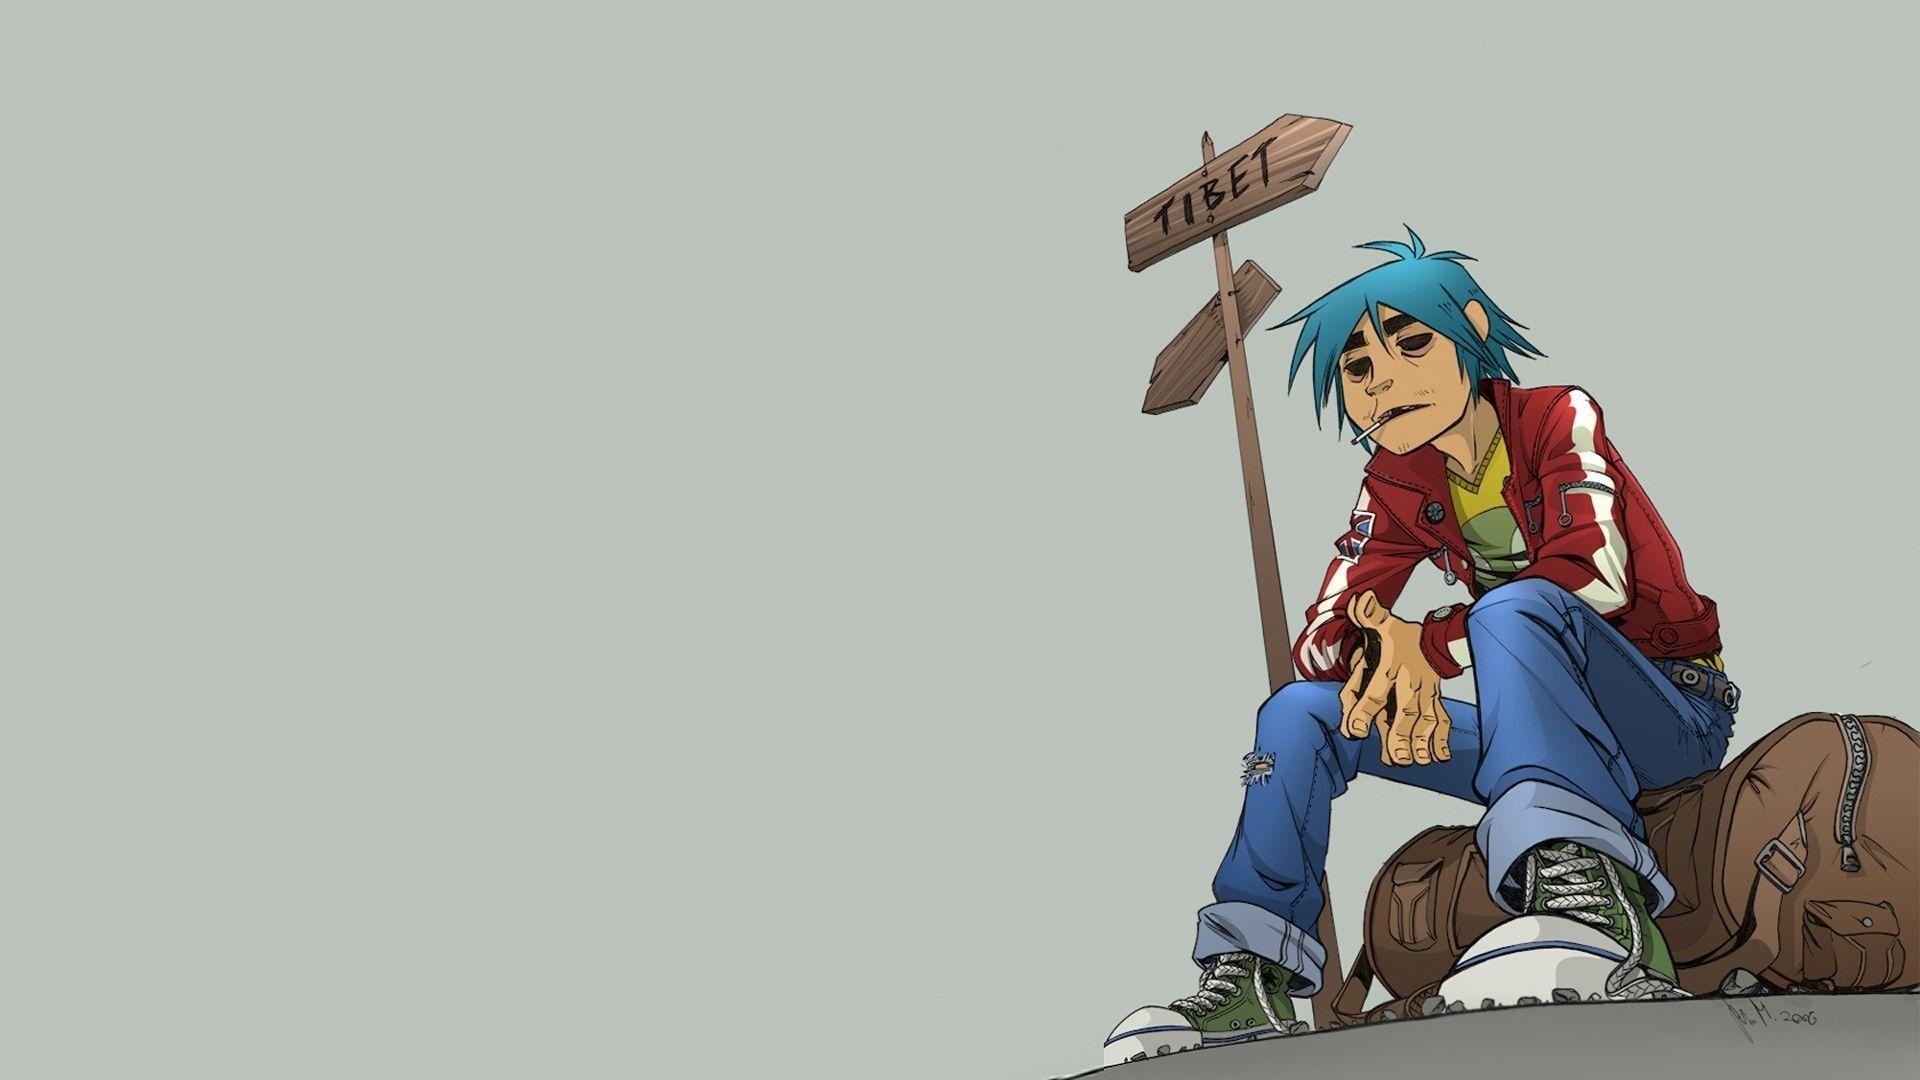 Gorillaz wallpapers ·① Download free stunning HD wallpapers for